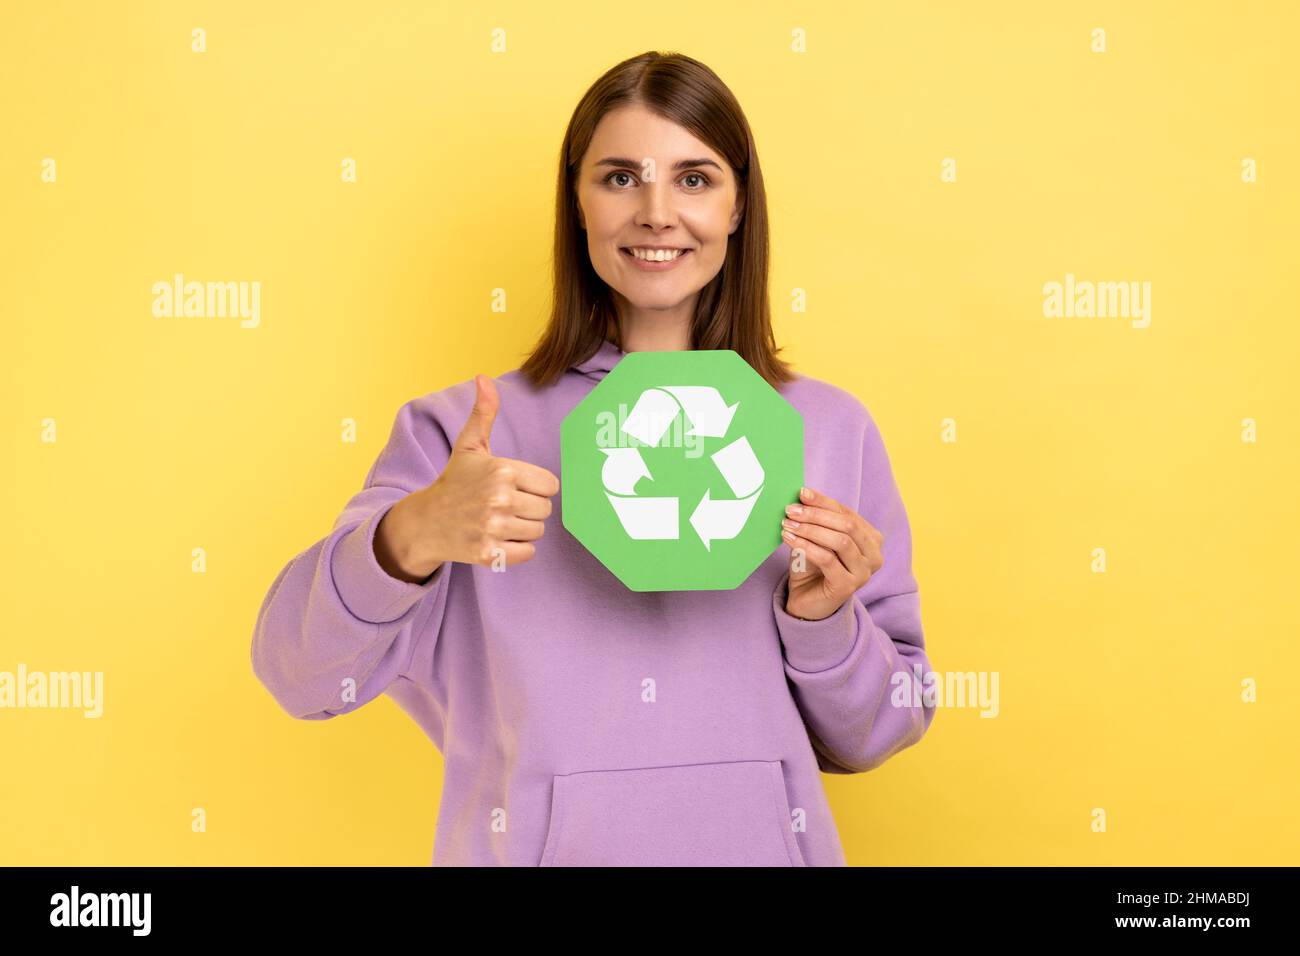 Positive woman with dark hair holding in hands green recycling sing, ecology concept, looking at camera and showing thumb up, wearing purple hoodie. Indoor studio shot isolated on yellow background. Stock Photo